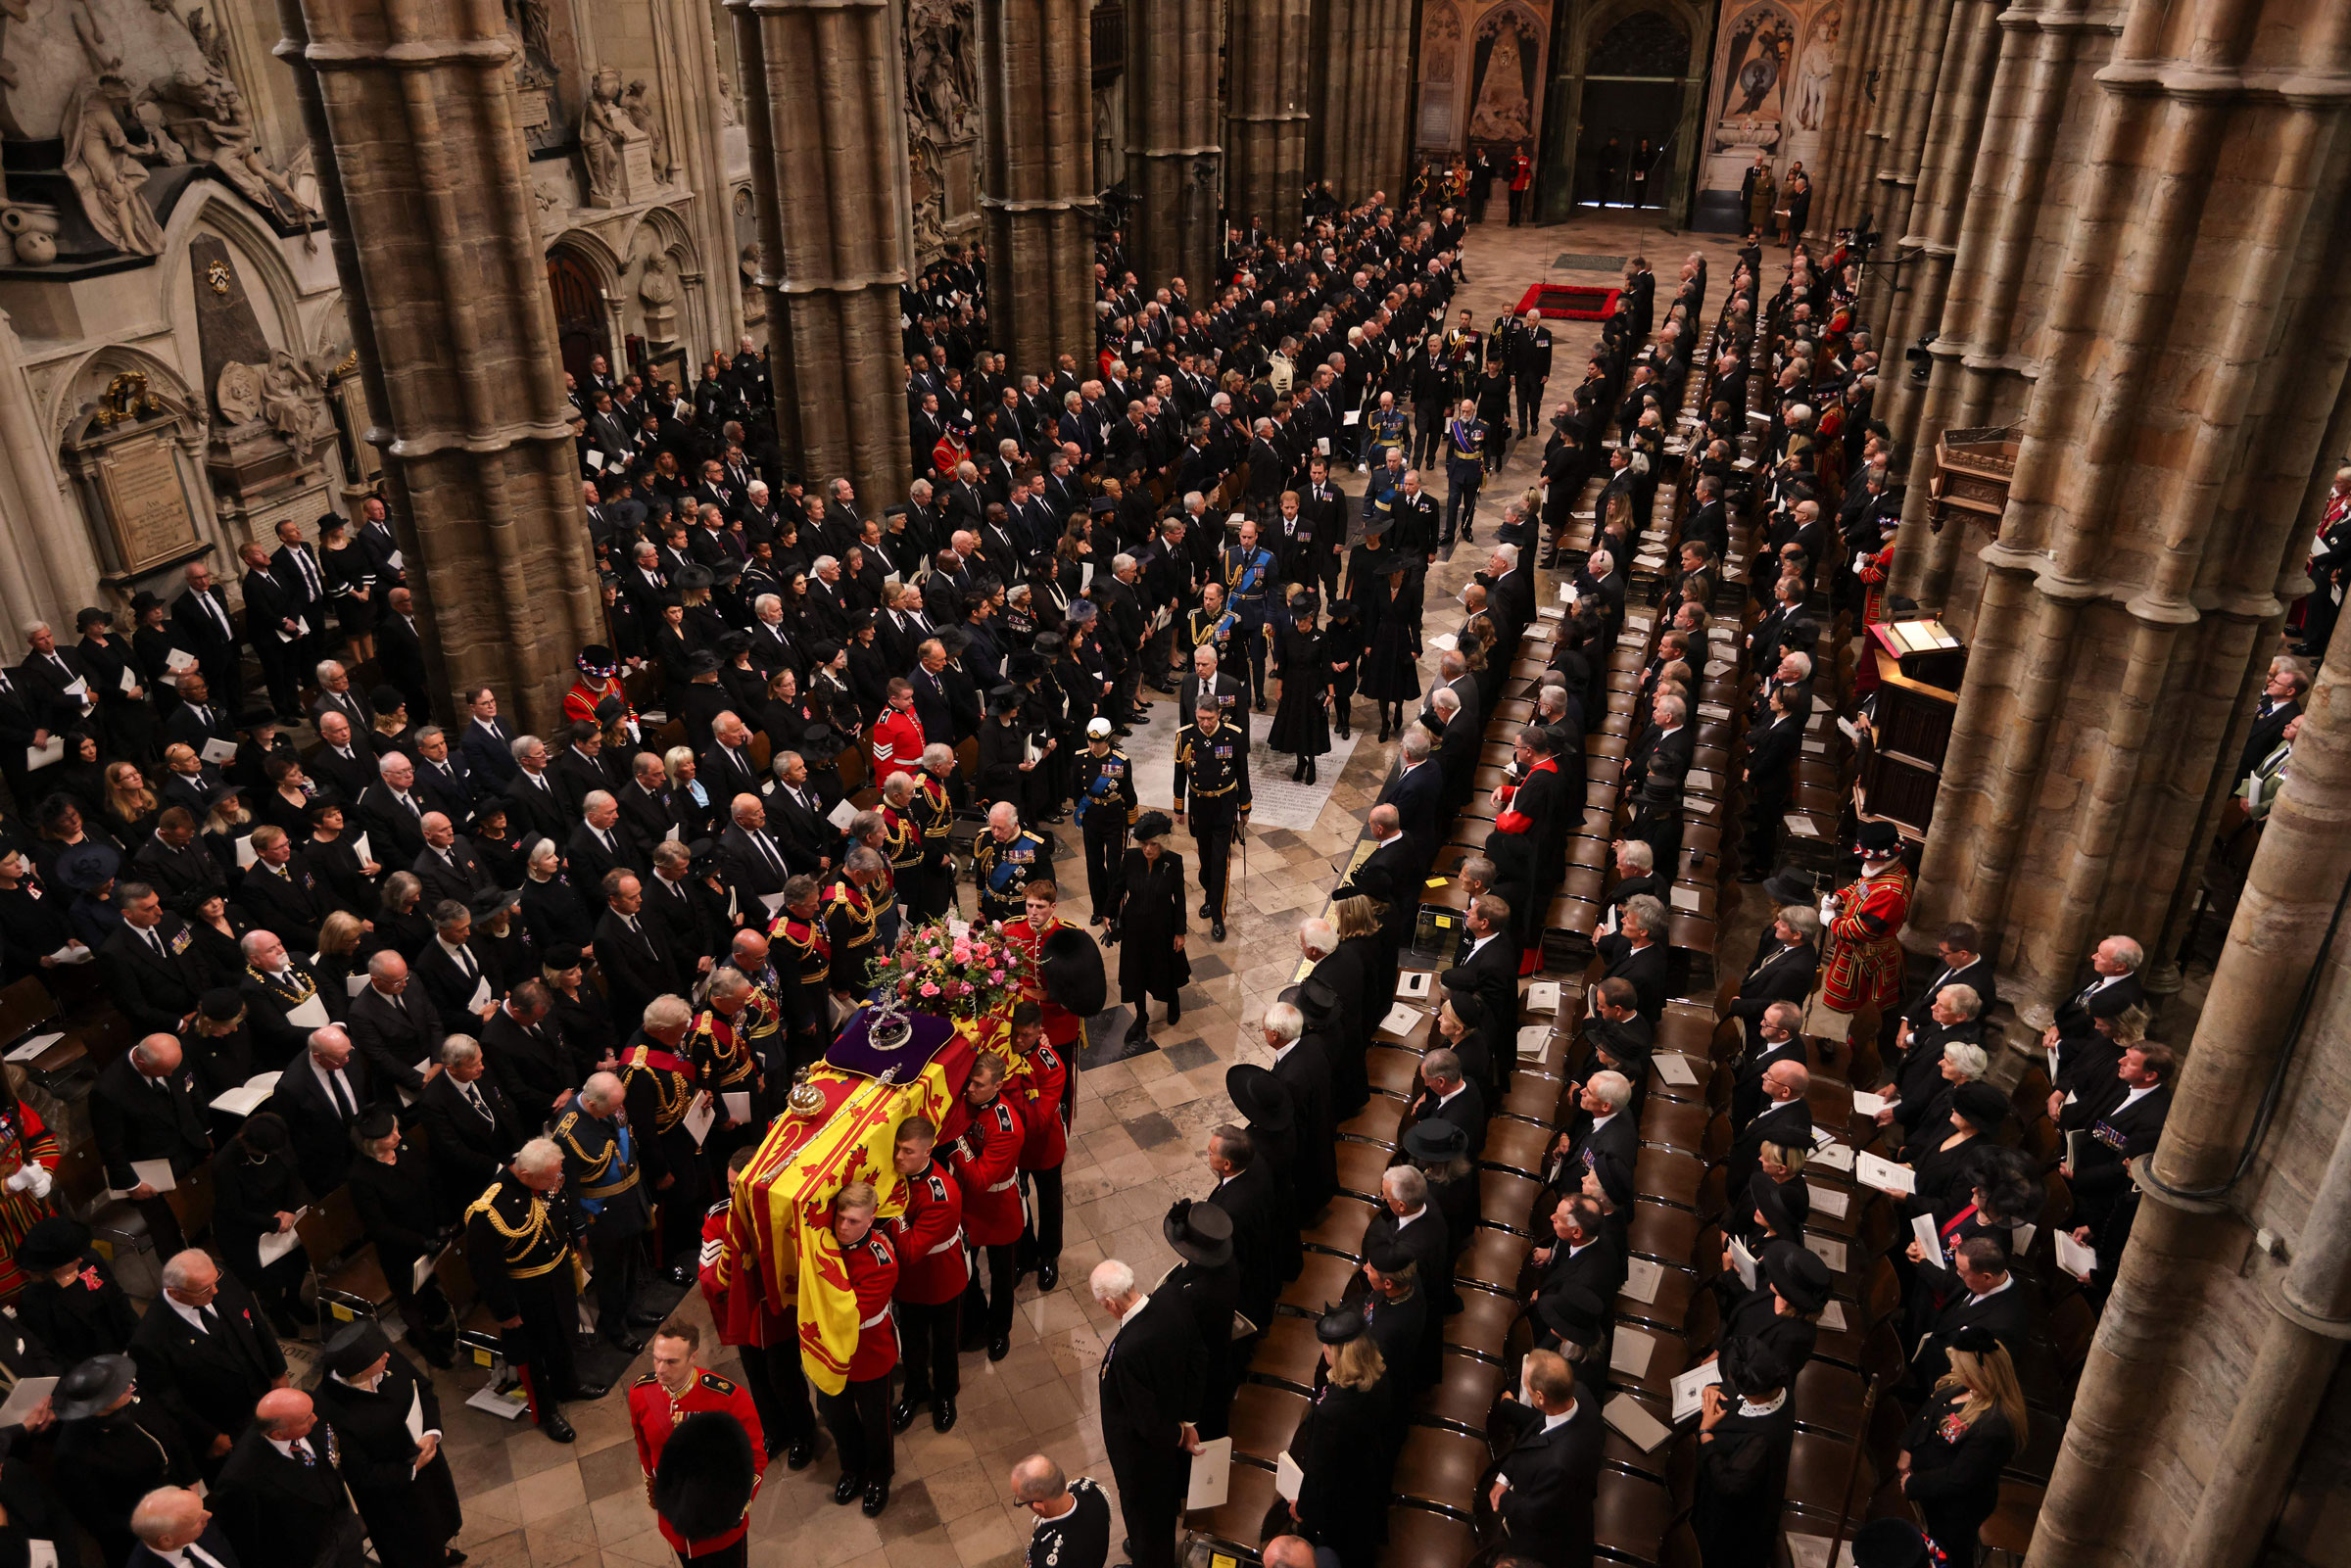 The bearer party carries the coffin of Queen Elizabeth II, draped in the royal standard, into Westminster Abbey in London on Sept. 19, 2022, ahead of the state funeral service. (Jack Hill—Pool/AFP/Getty Images)